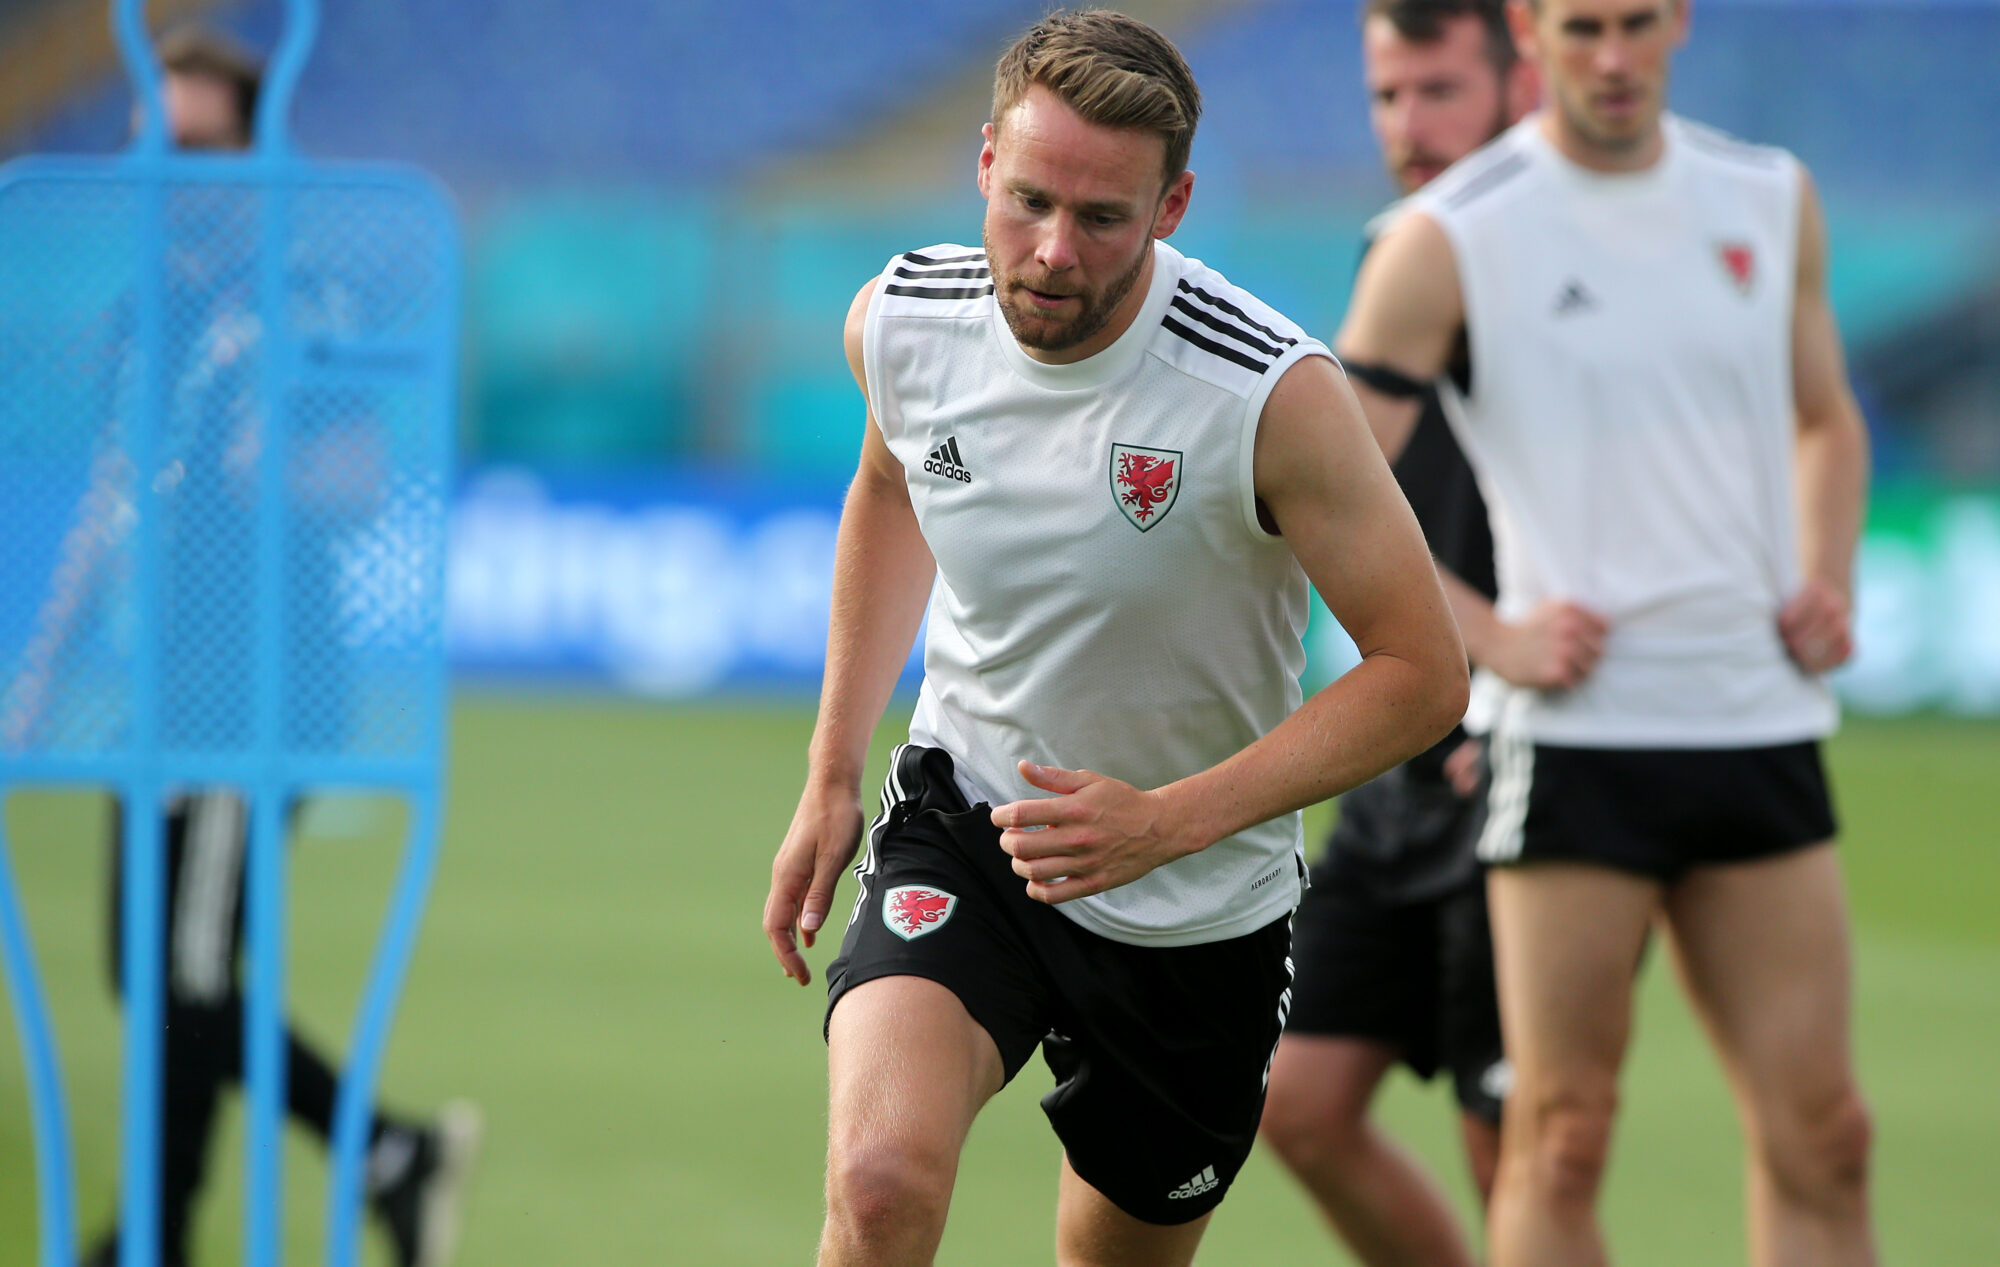 “What dreams are made of” – Charlton’s Chris Gunter reacts to Wales ...